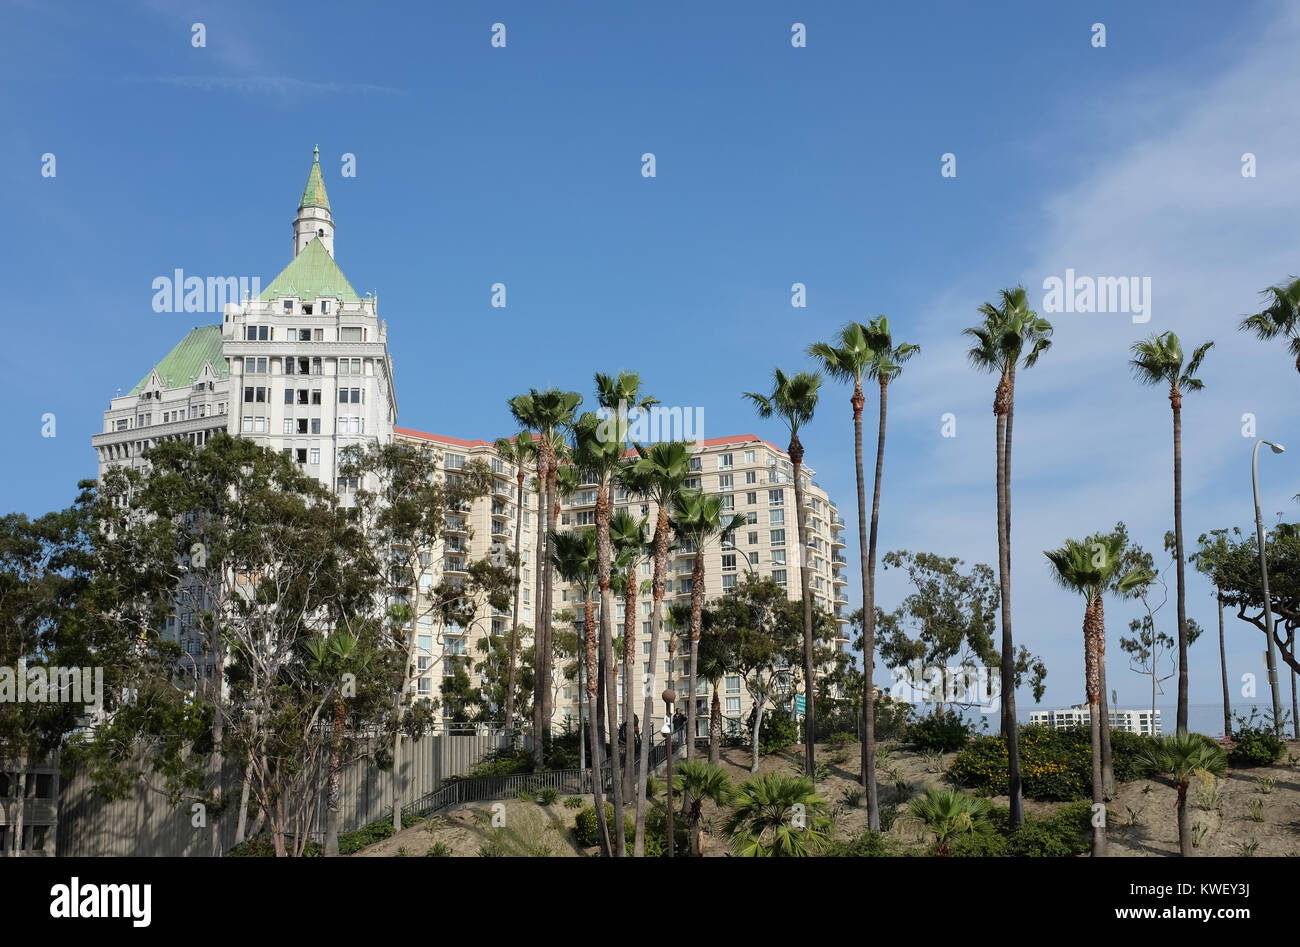 LONG BEACH, CA - FEBRUARY 21, 2015: Villa Riviera on Ocean Boulevard. The building completed in 1929 overlooks both the city and ocean is on the Natio Stock Photo